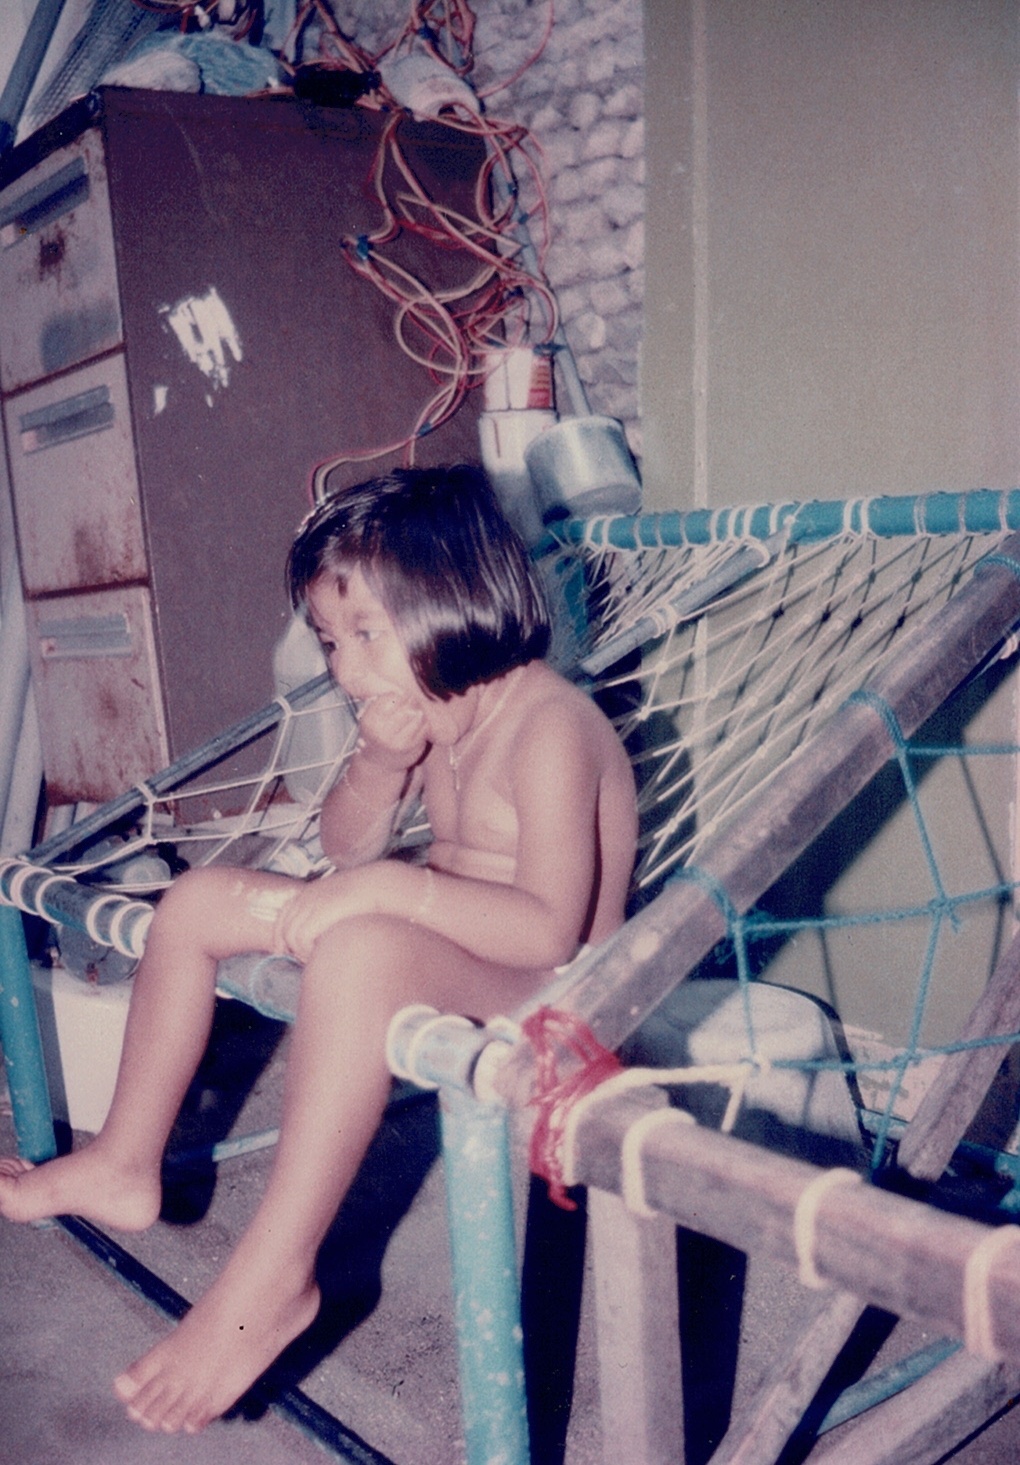 eman, the author, as a child in his mother's home in the Maldives